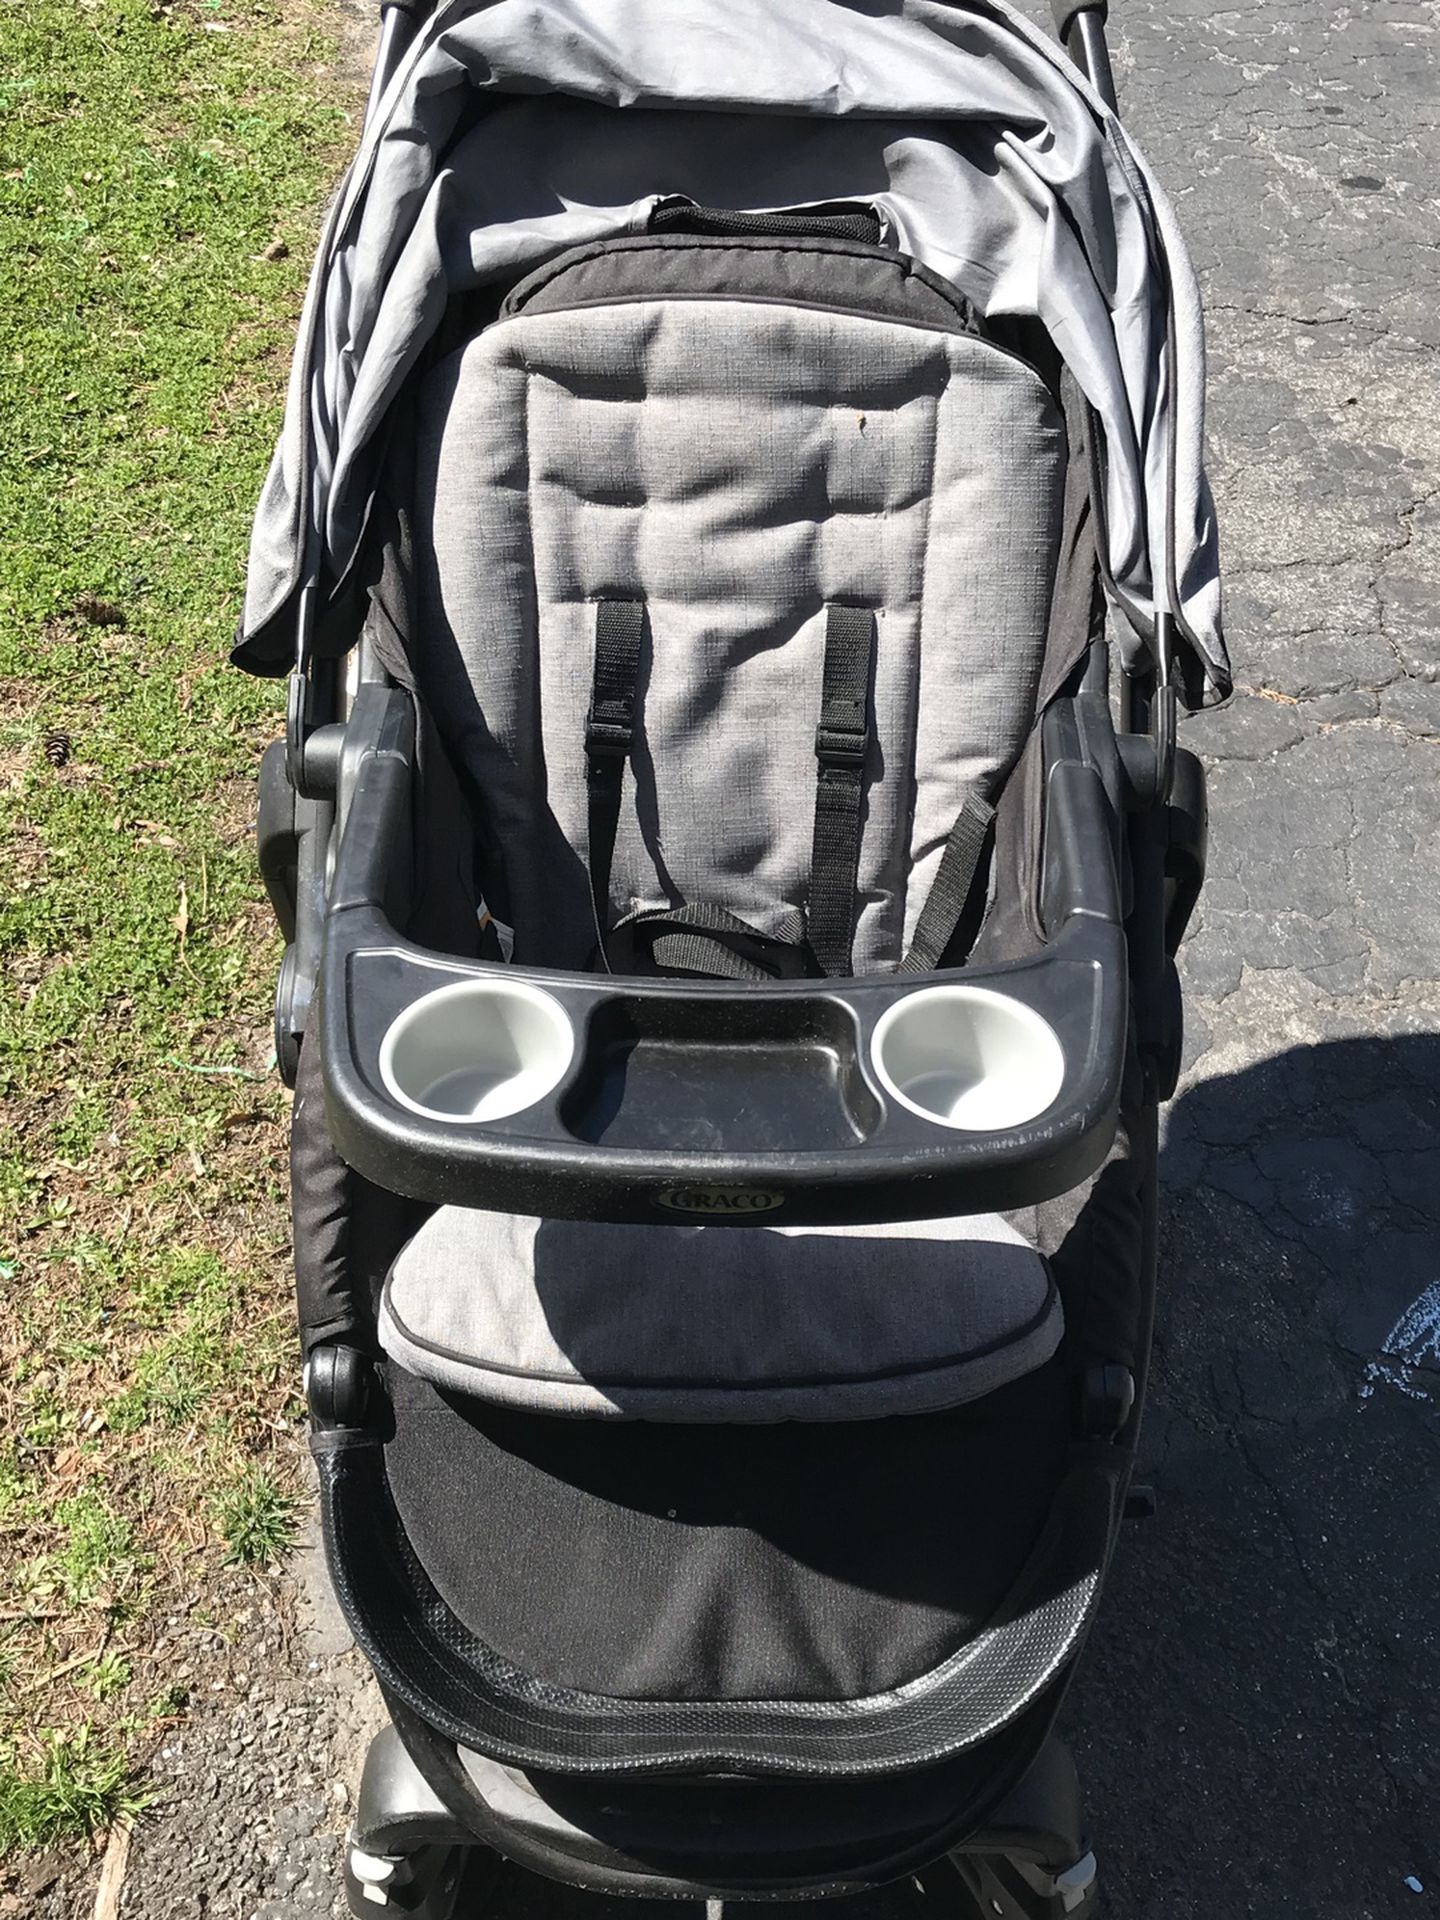 Graco Modes Travel system. No longer have the car seat